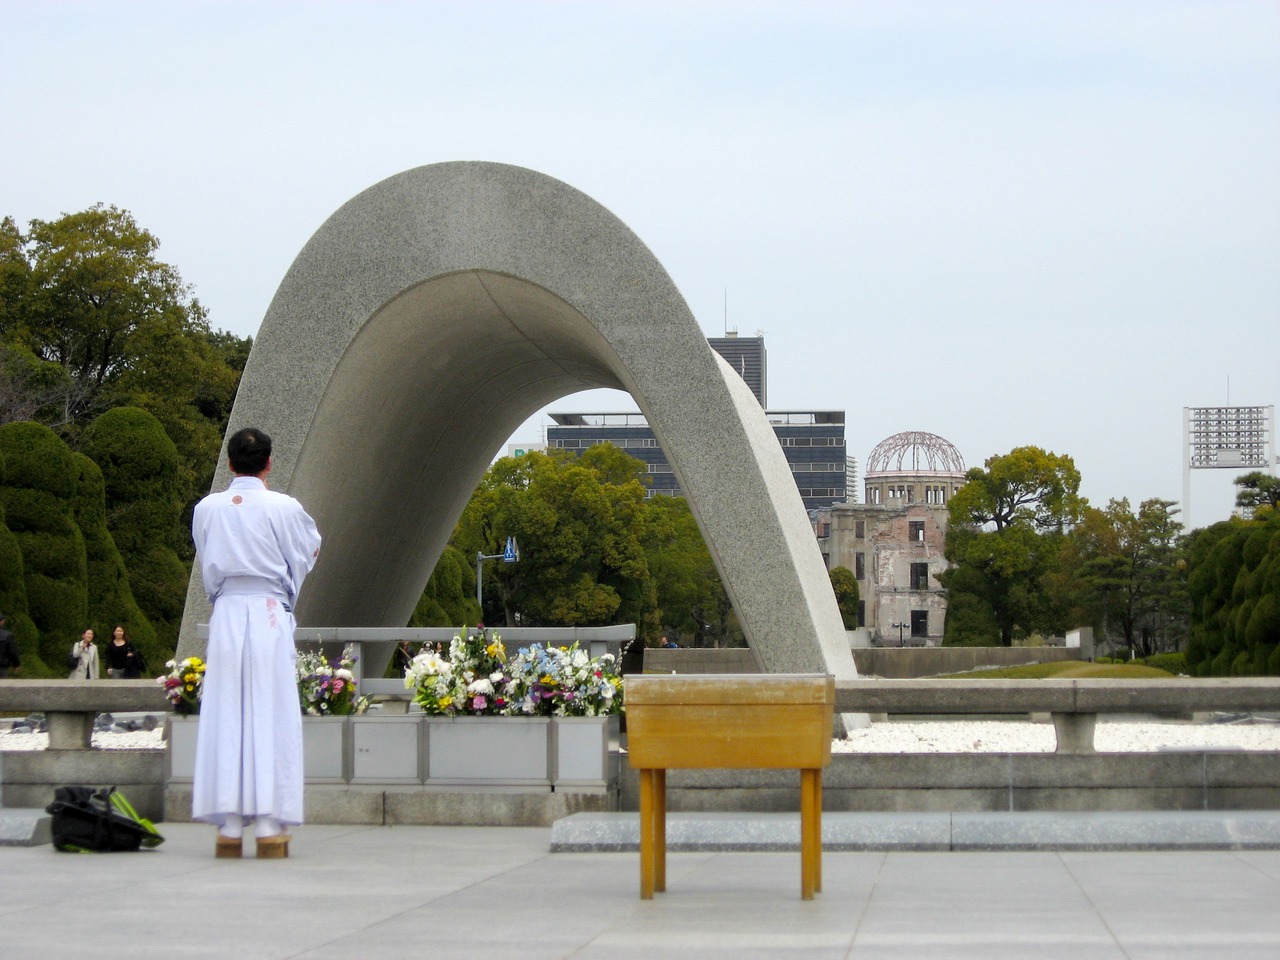 A man in a robe stands in remembrance at the Cenotaph for the A-Bomb Victims (Memorial Monument for Hiroshima, City of Peace) with the Genbaku Dome behind.